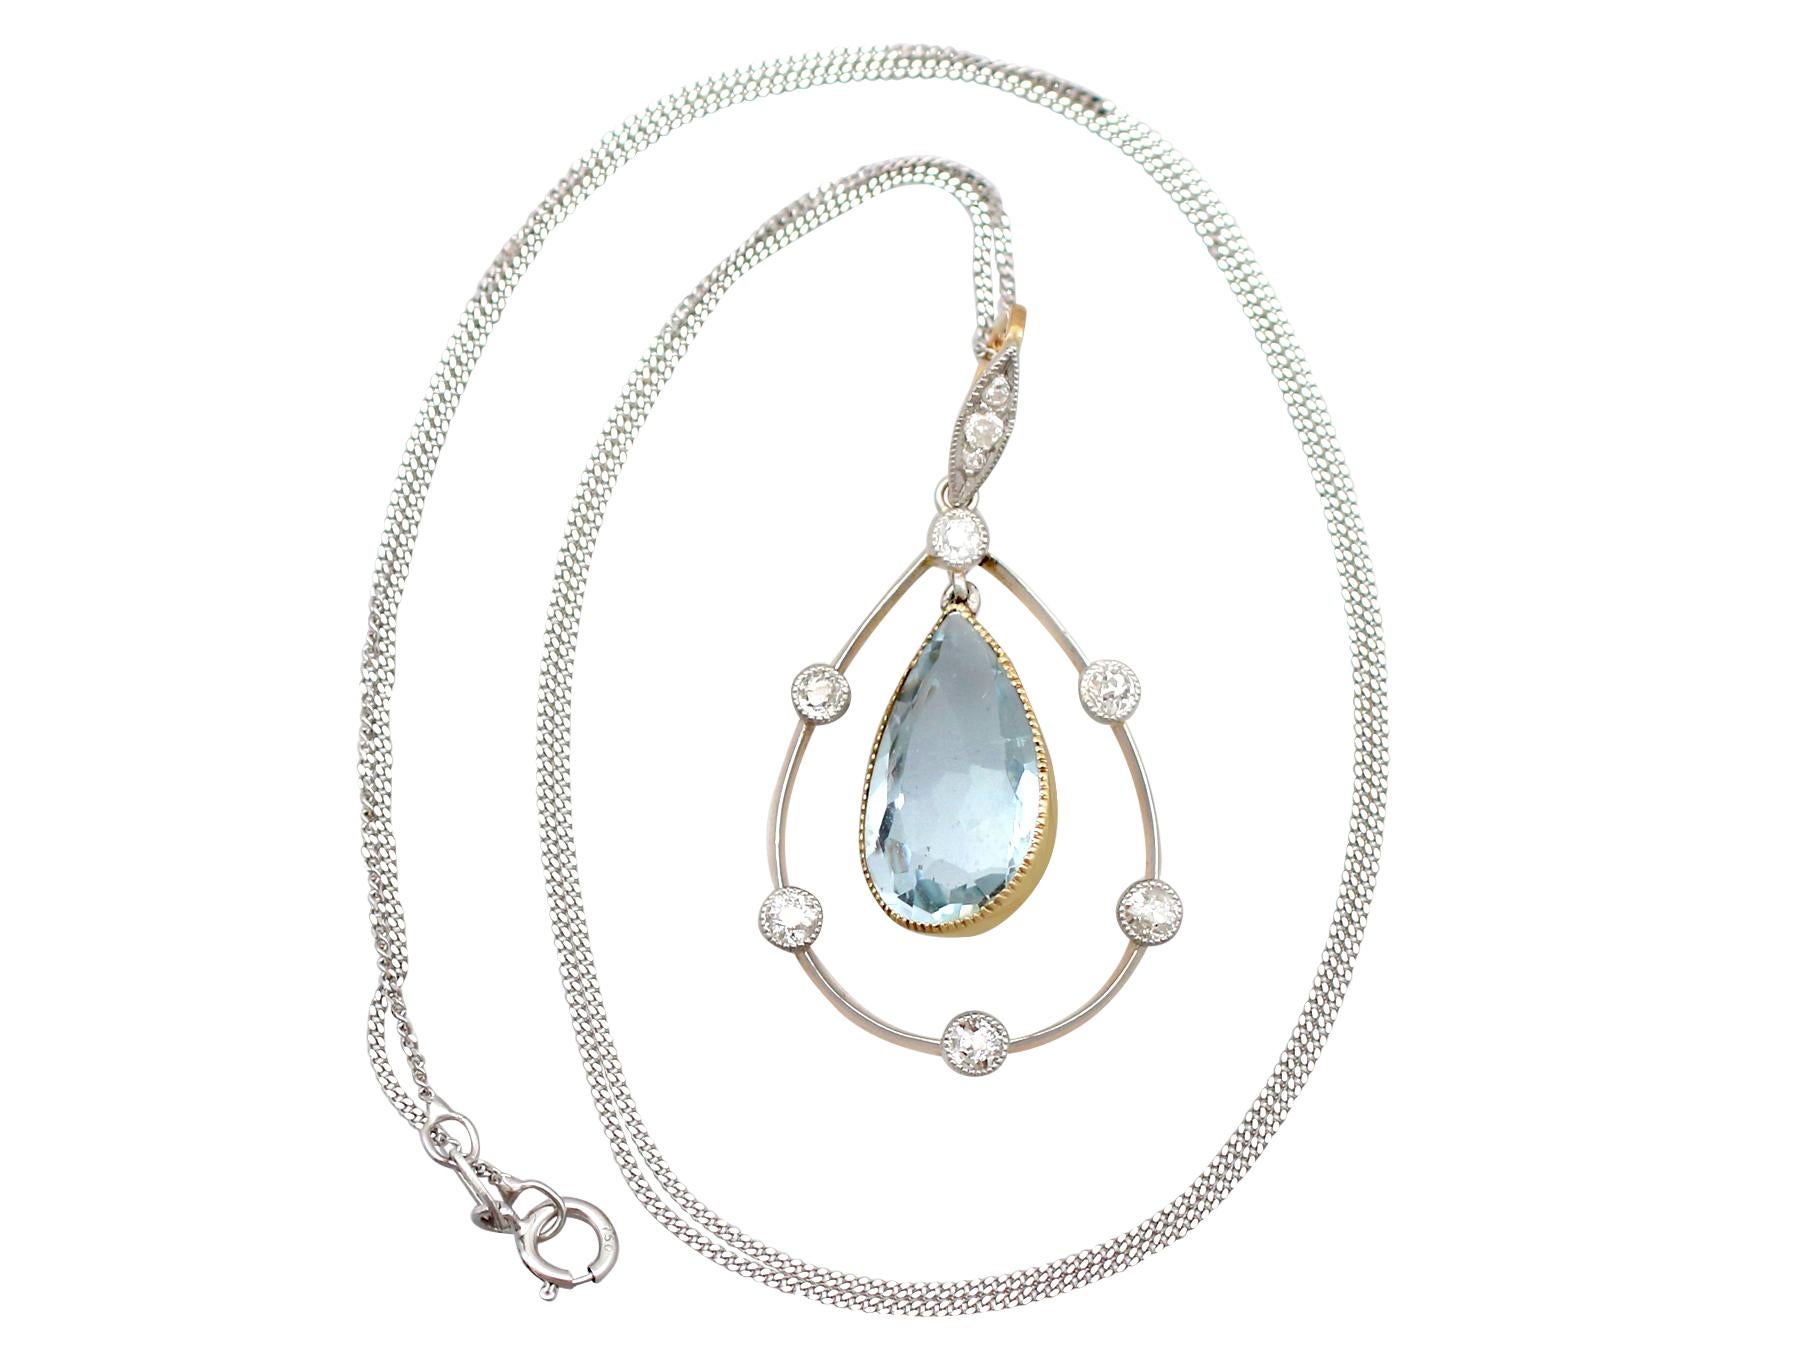 An impressive antique 4.55 carat aquamarine and 0.39 carat diamond, 9 karat yellow gold and platinum set pendant; part of our diverse antique jewellery collections.

This stunning, fine and impressive aquamarine pendant has been crafted in 9k yellow